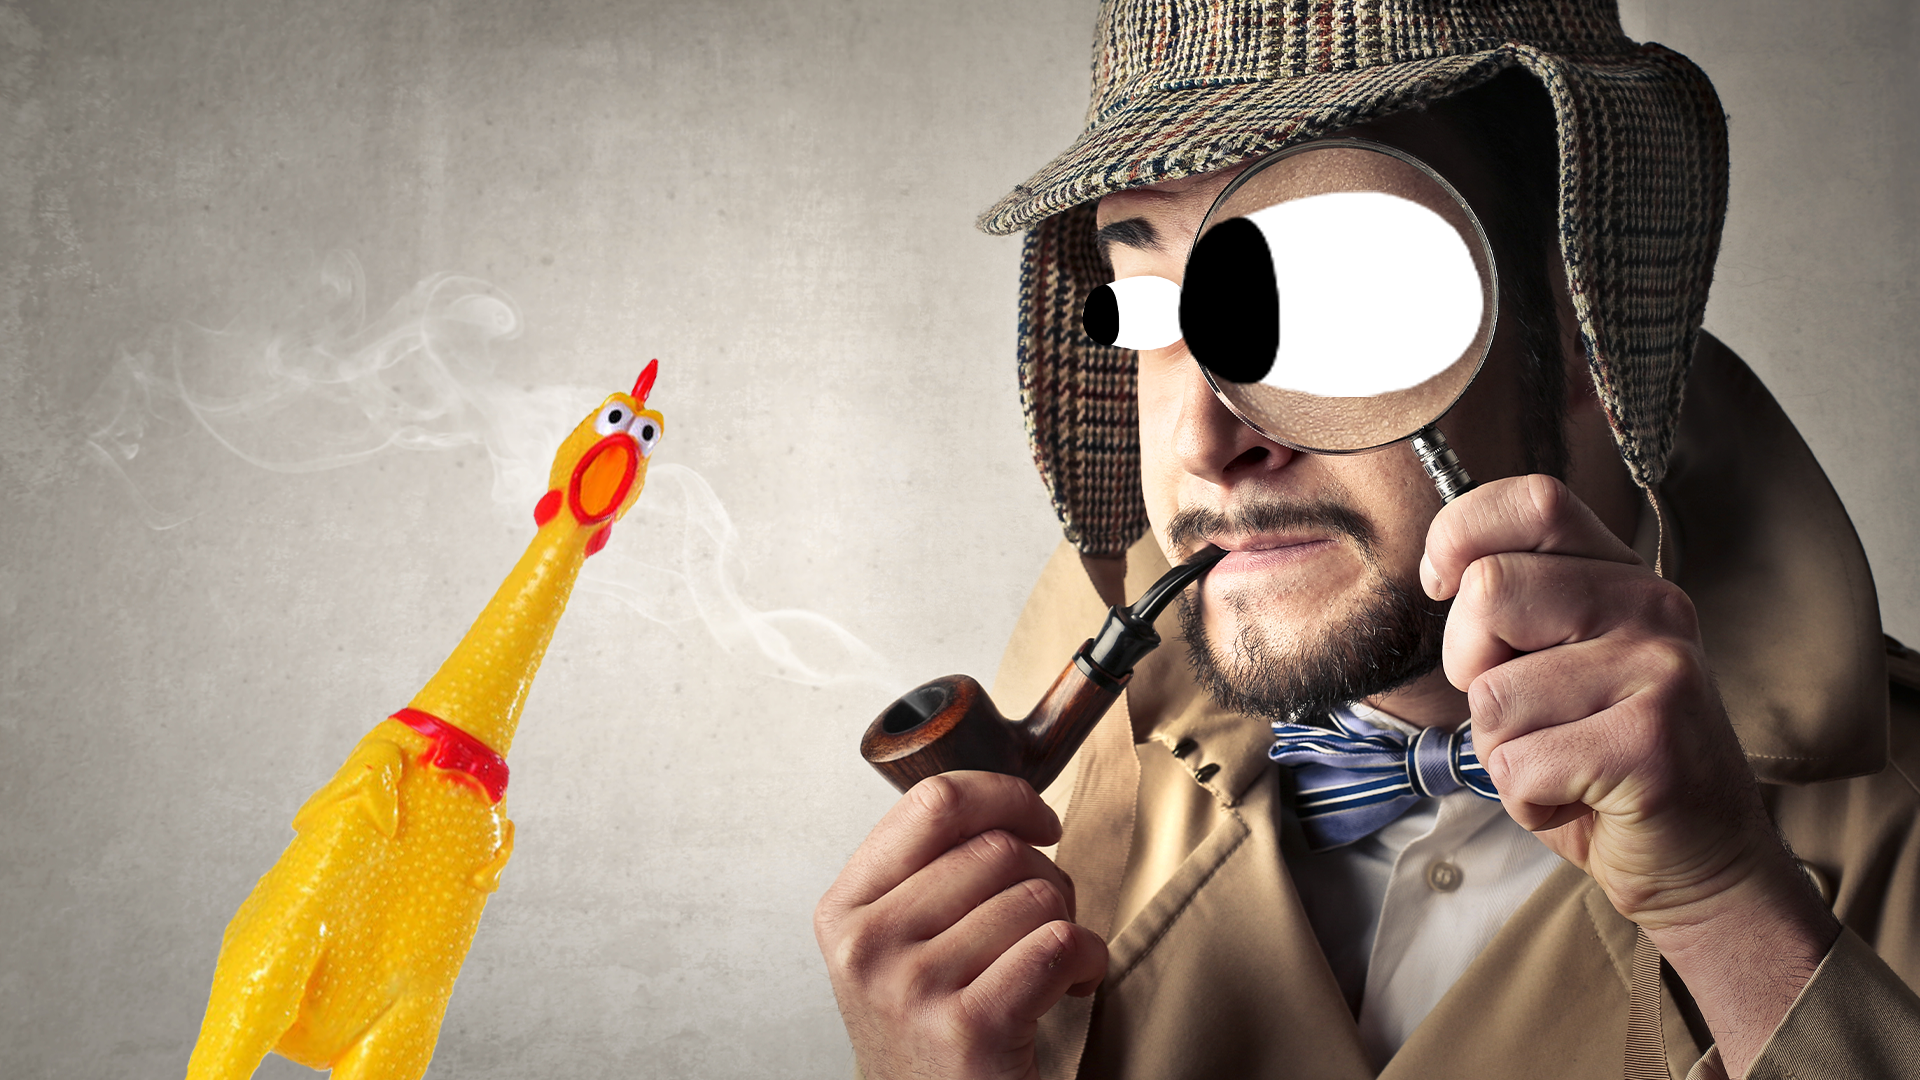 Detective looking through magnifying glass with rubber chicken